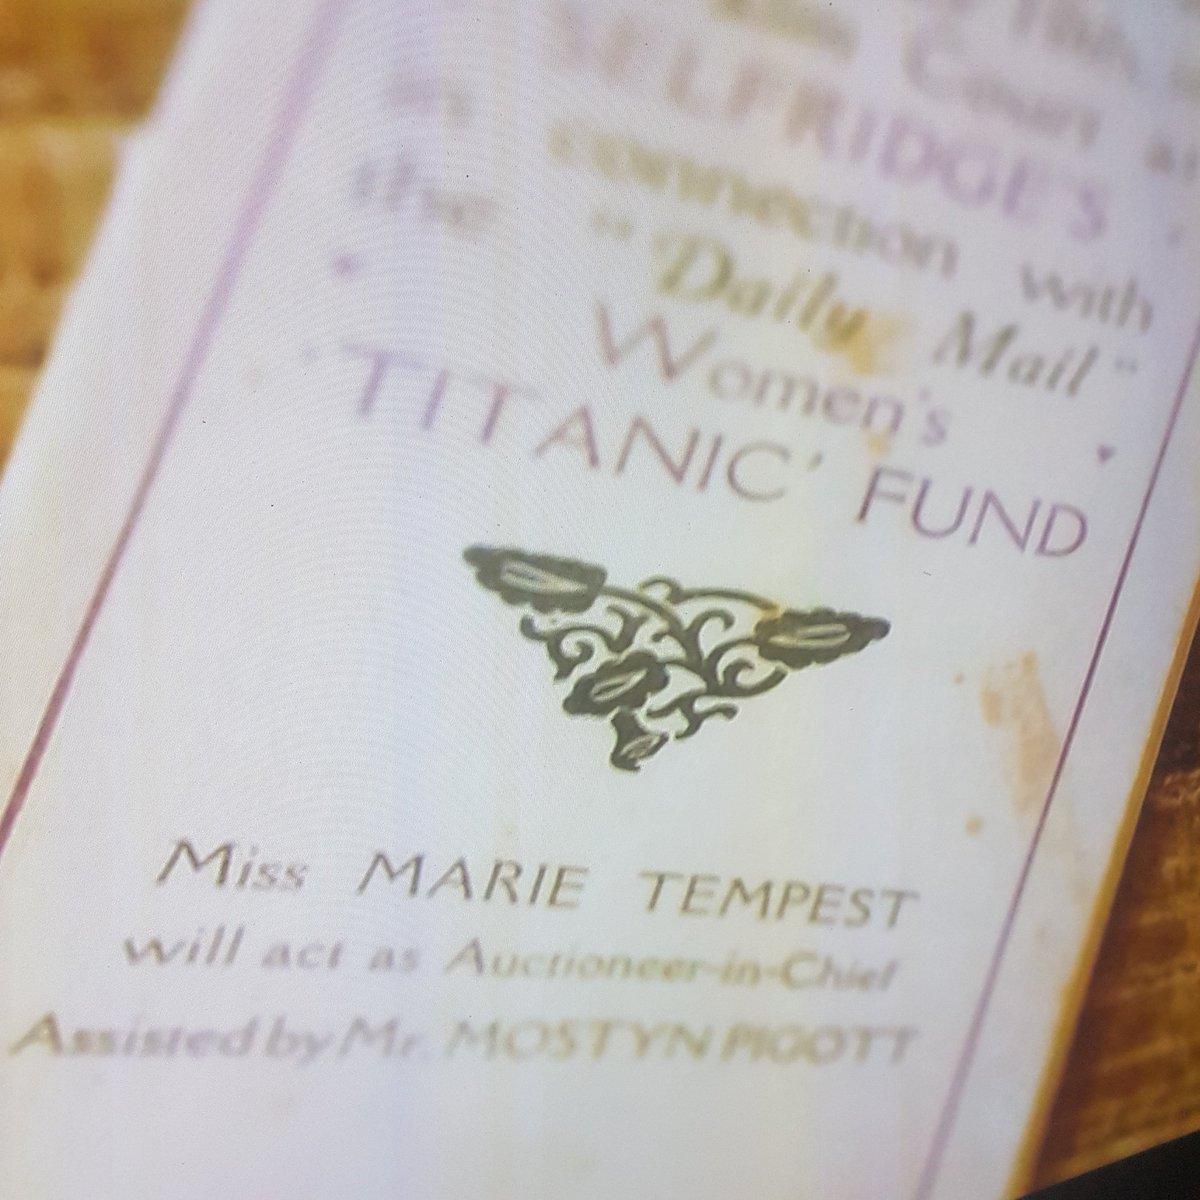 One of my most favourite things in the whole series. I would of gone to £150 without hesitation just to own something so unique and poignant. Holding history in your hands  #thebiddingroom #titanic #historyinyourhands